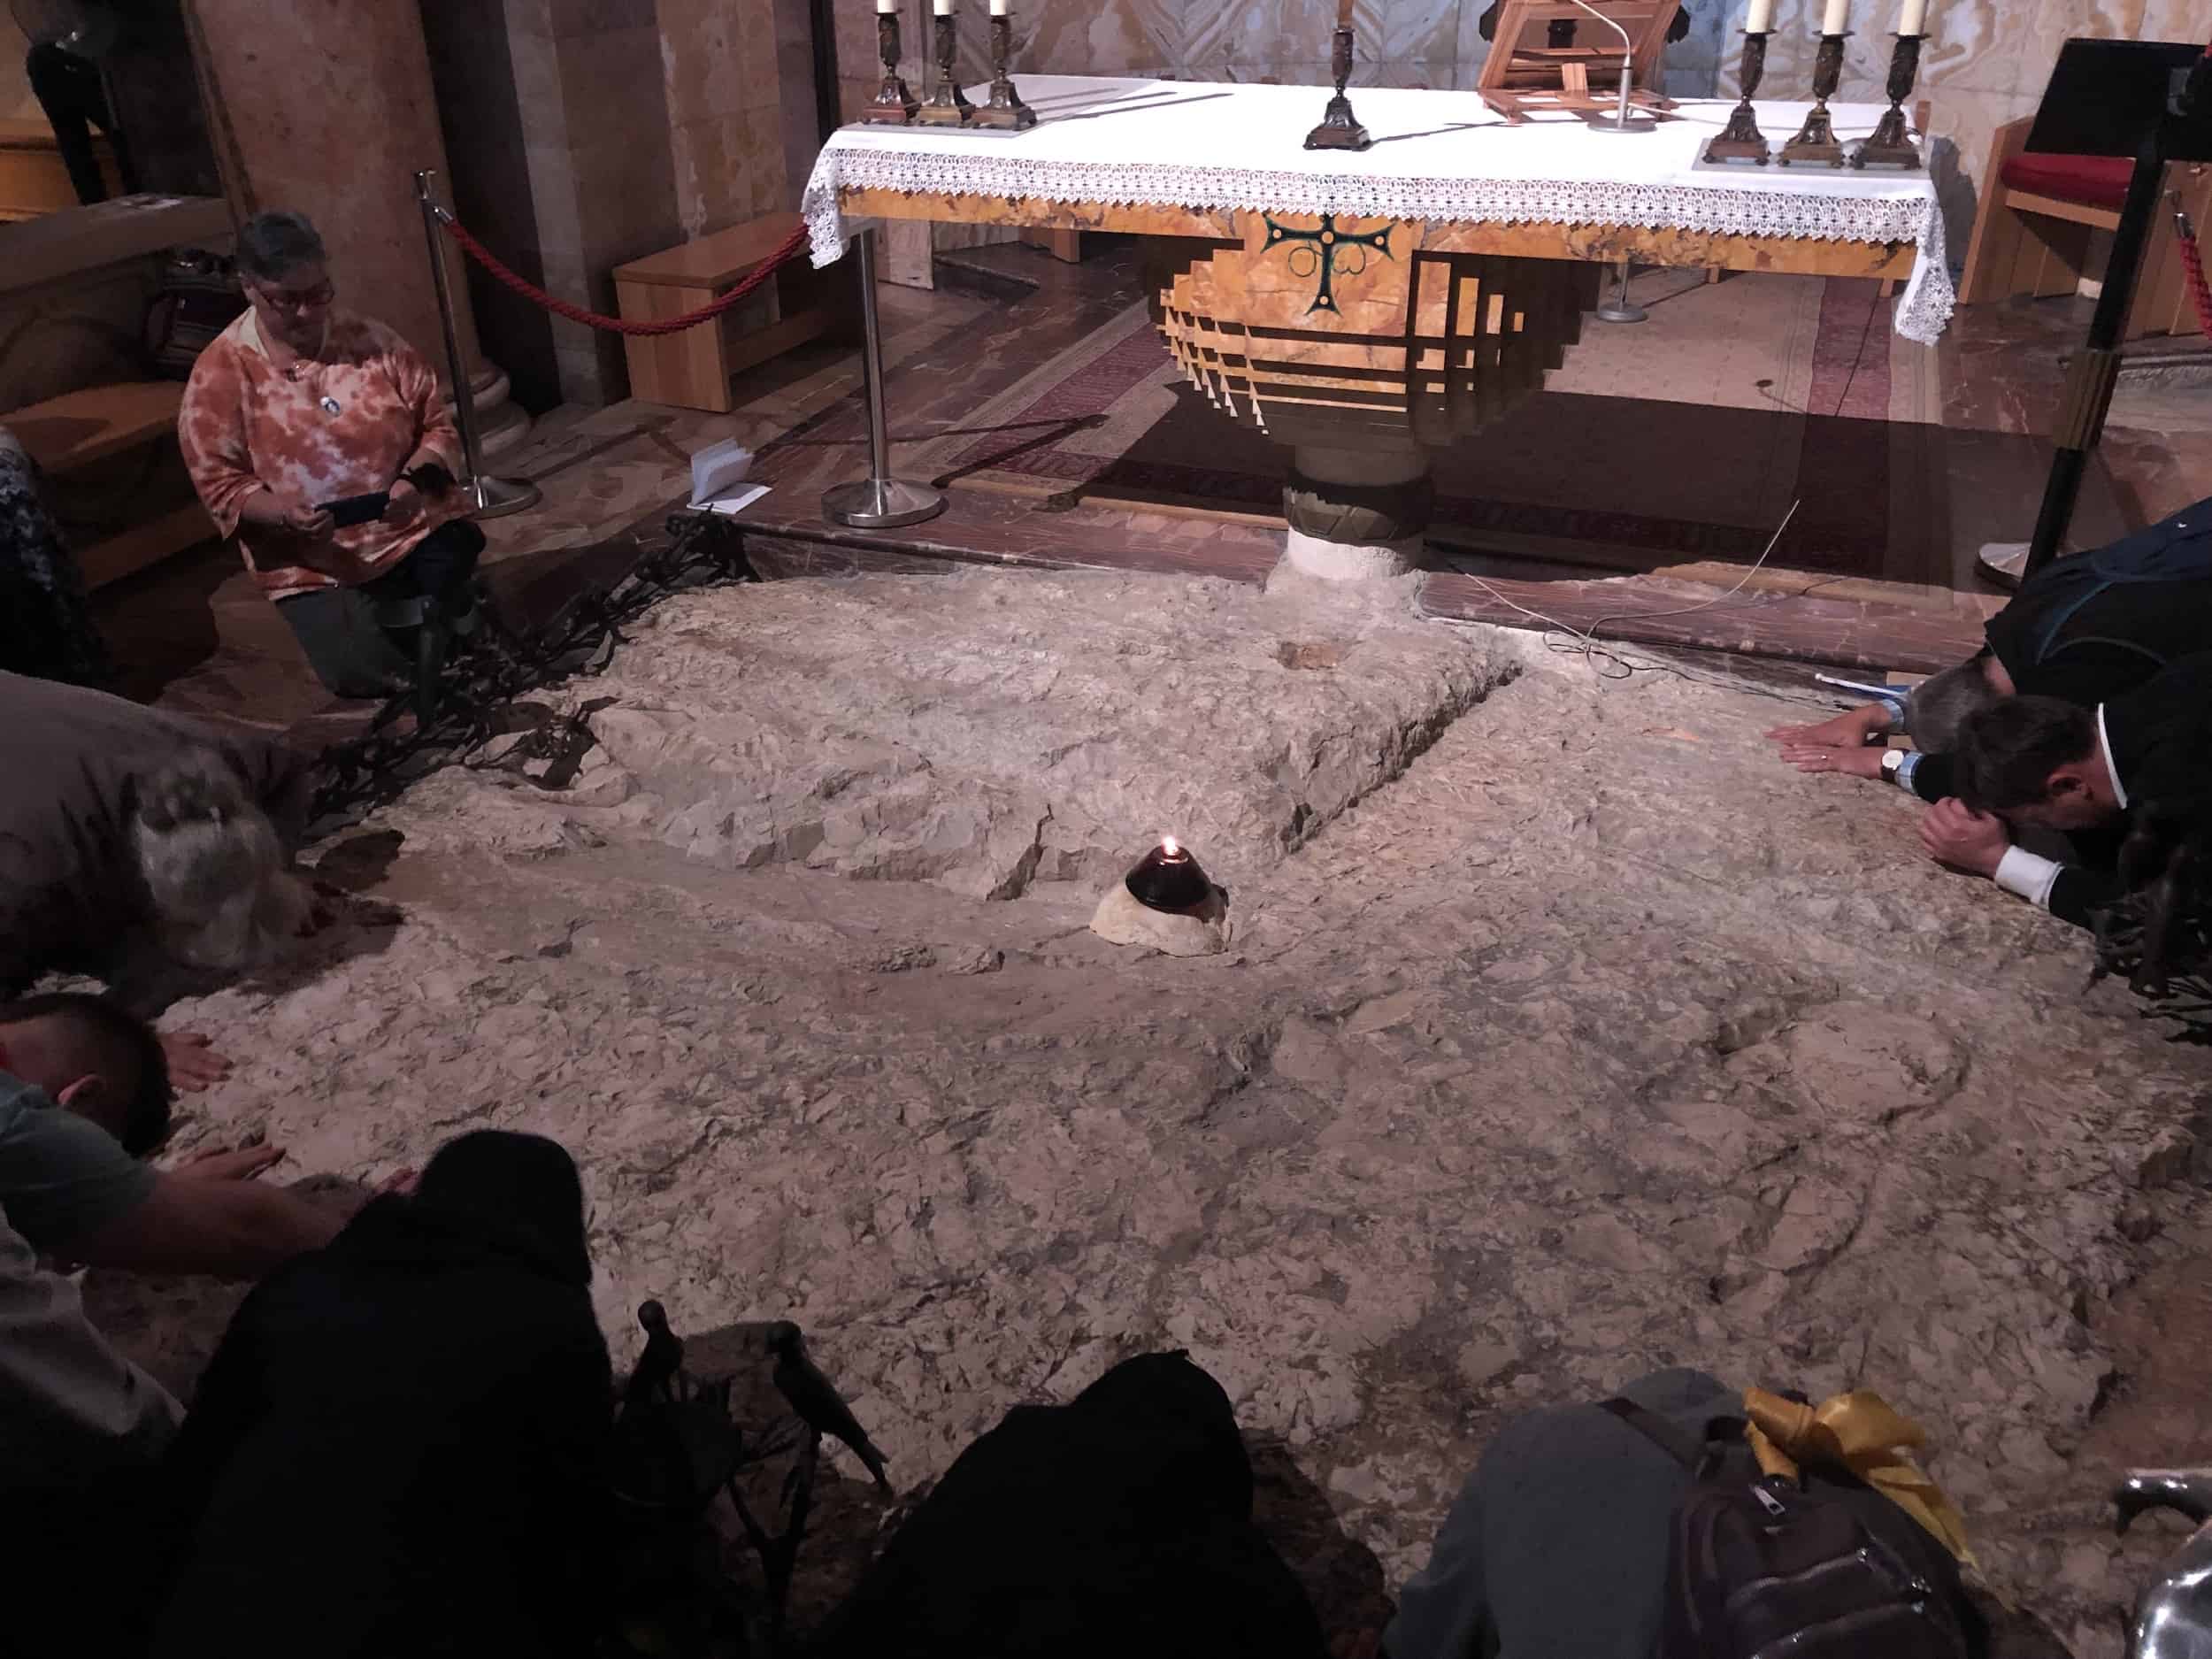 Rock of Agony in the Church of All Nations at Gethsemane in Jerusalem